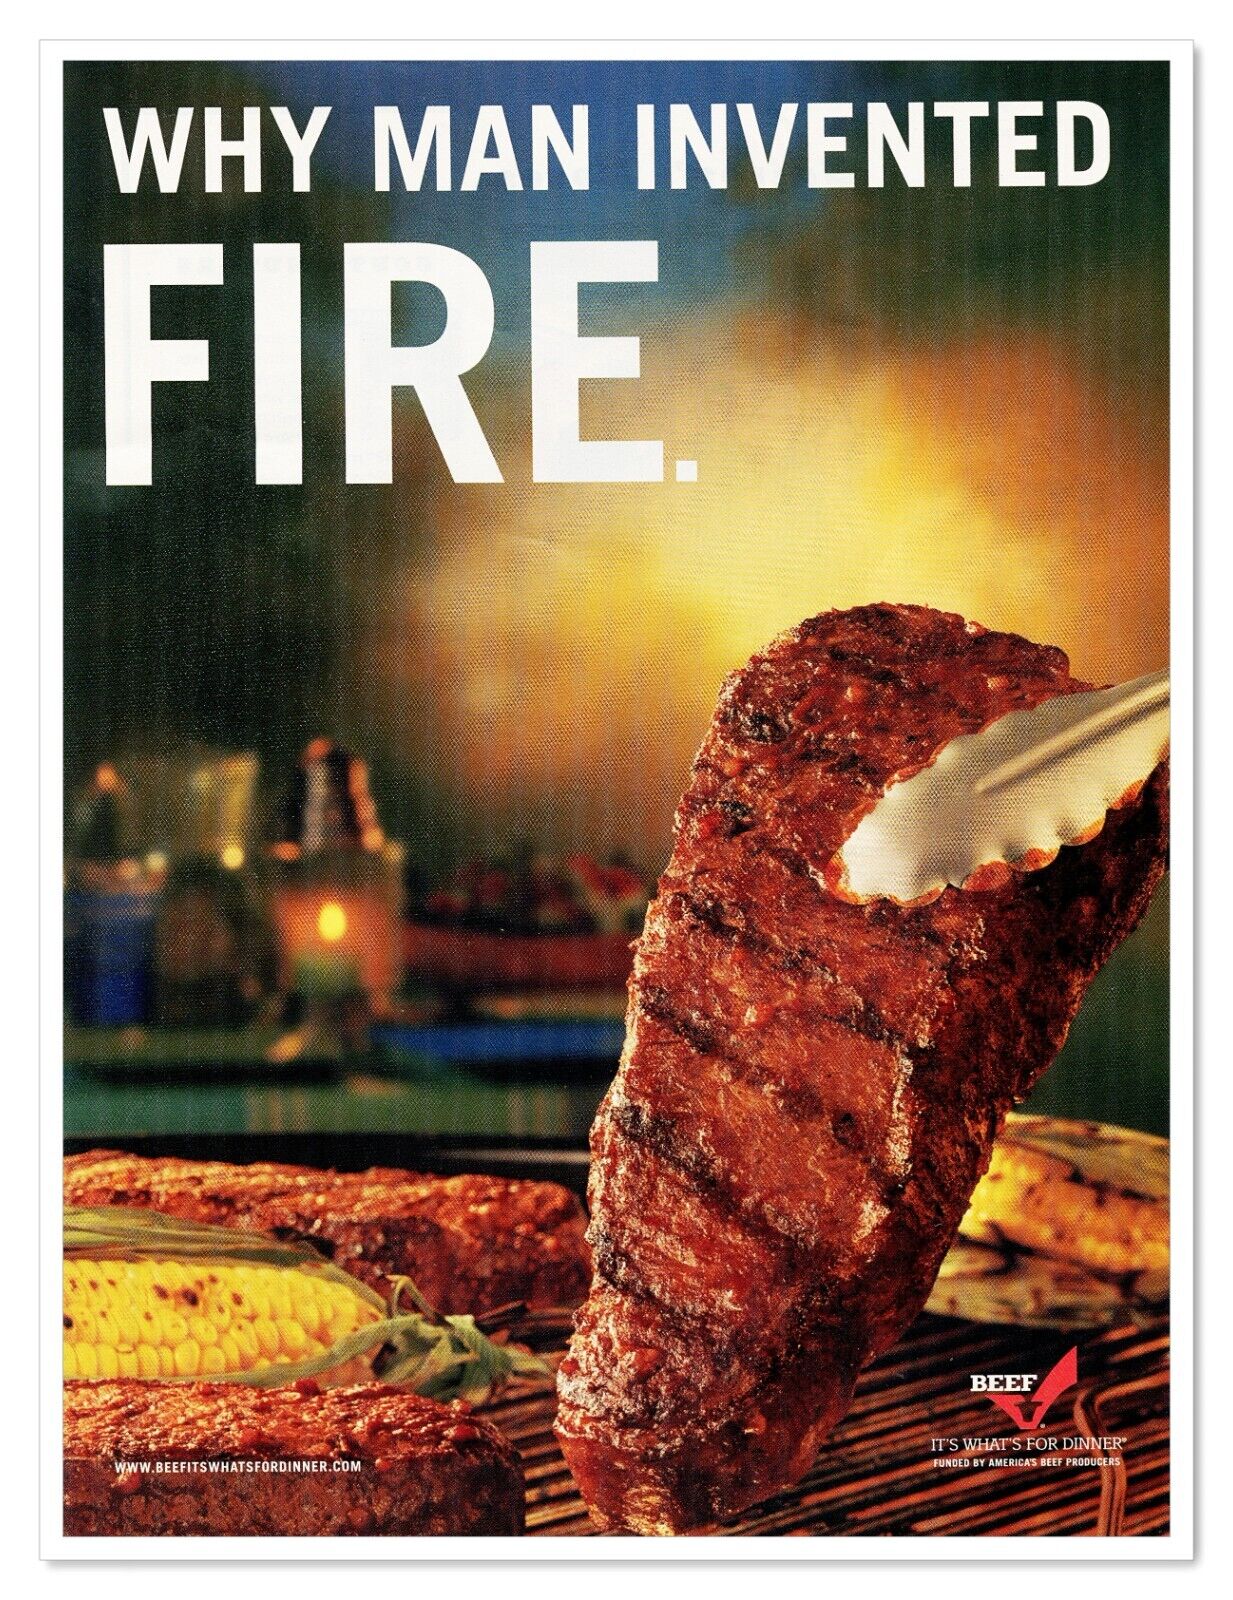 Beef It\'s What\'s for Dinner Man Invented Fire 2006 Full-Page Print Magazine Ad